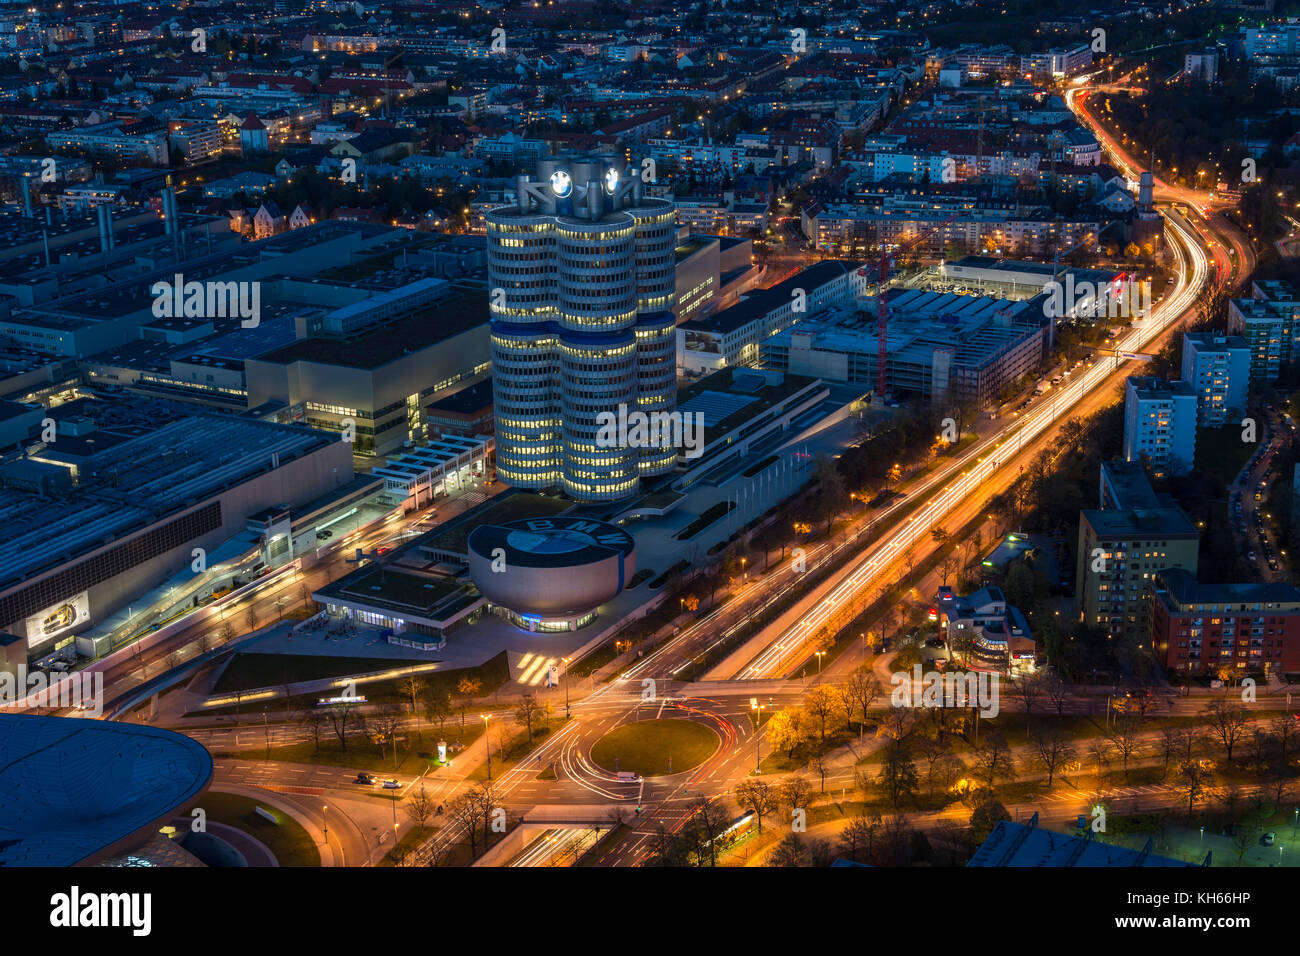 MUNICH, GERMANY - November 3, 2017: The lit BMW headquarters with light trails from traffic during blue hour from above Stock Photo